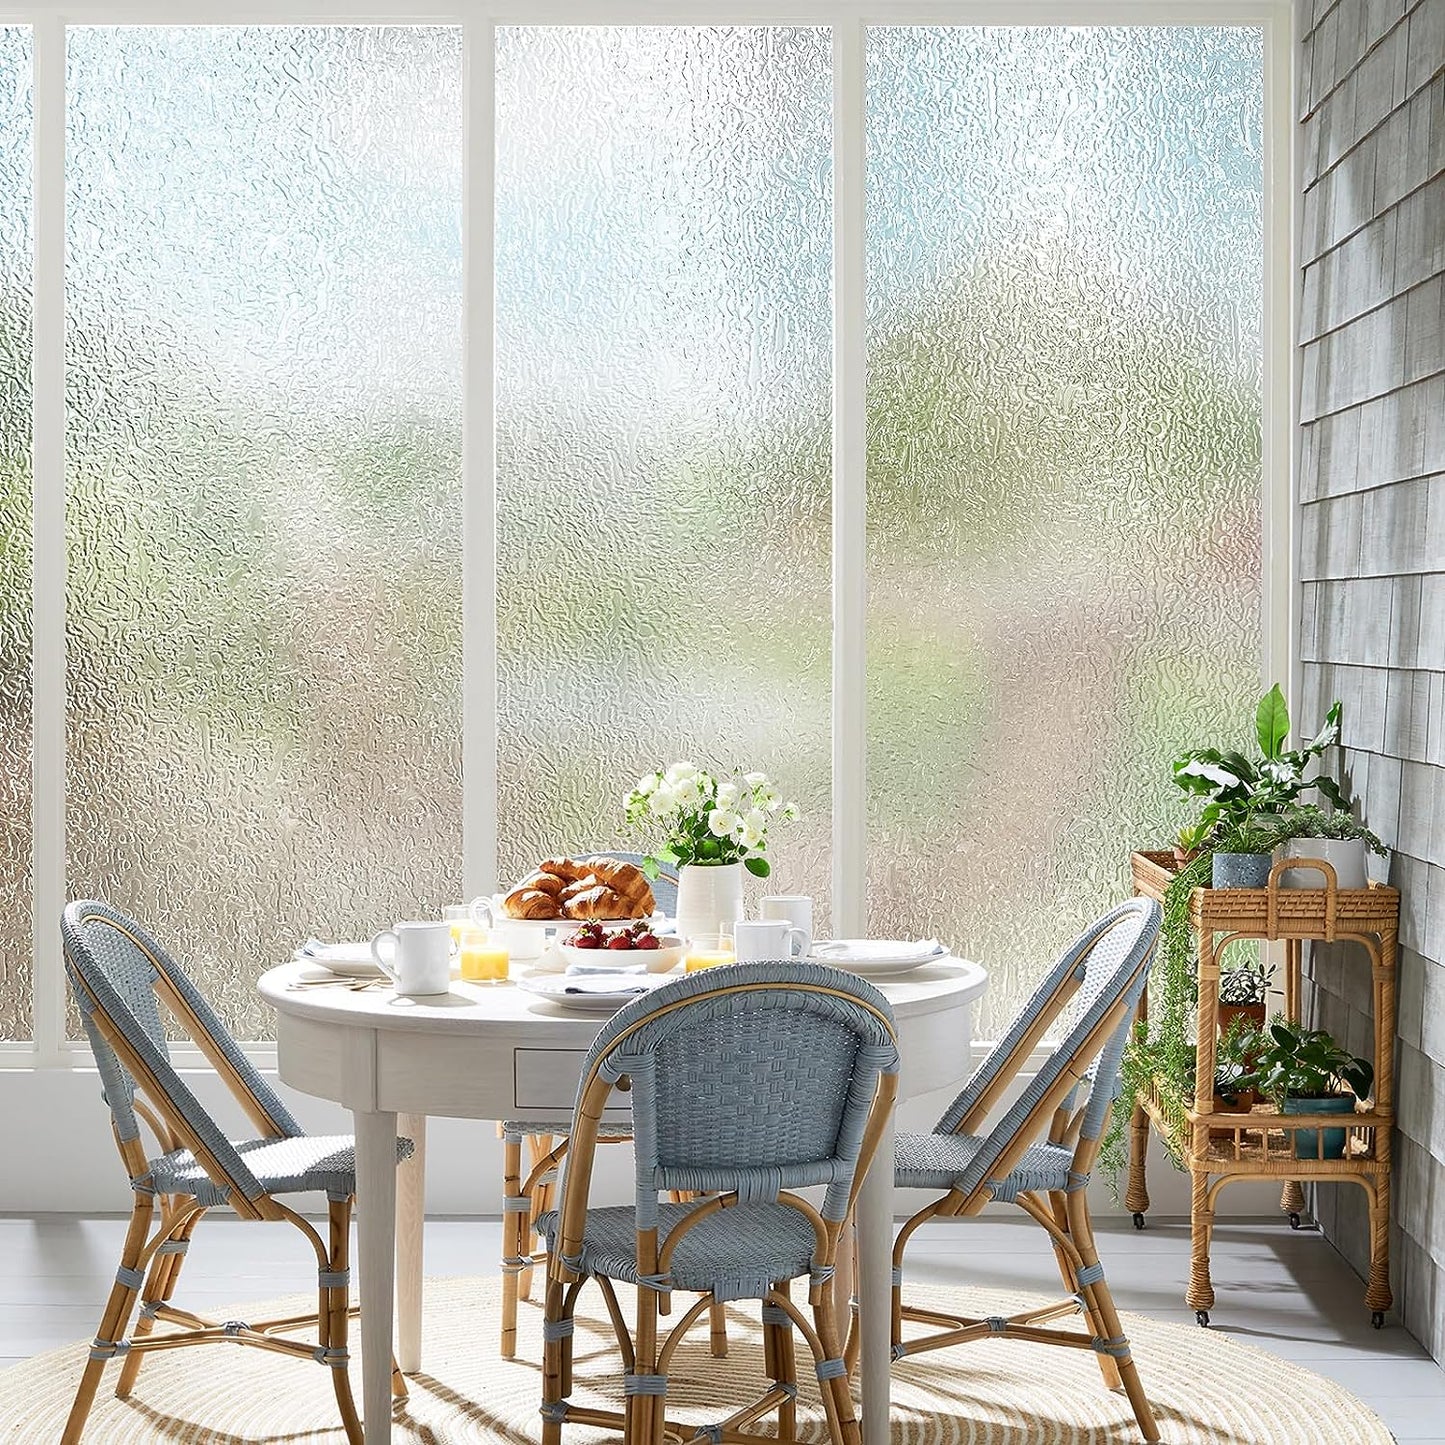 Frosted Window Privacy Film | Crystal Glass Film, No Glue Static Film | Anti UV Window Clings, One Way Vision Blocking for Home Office (35.4" x 118.1")